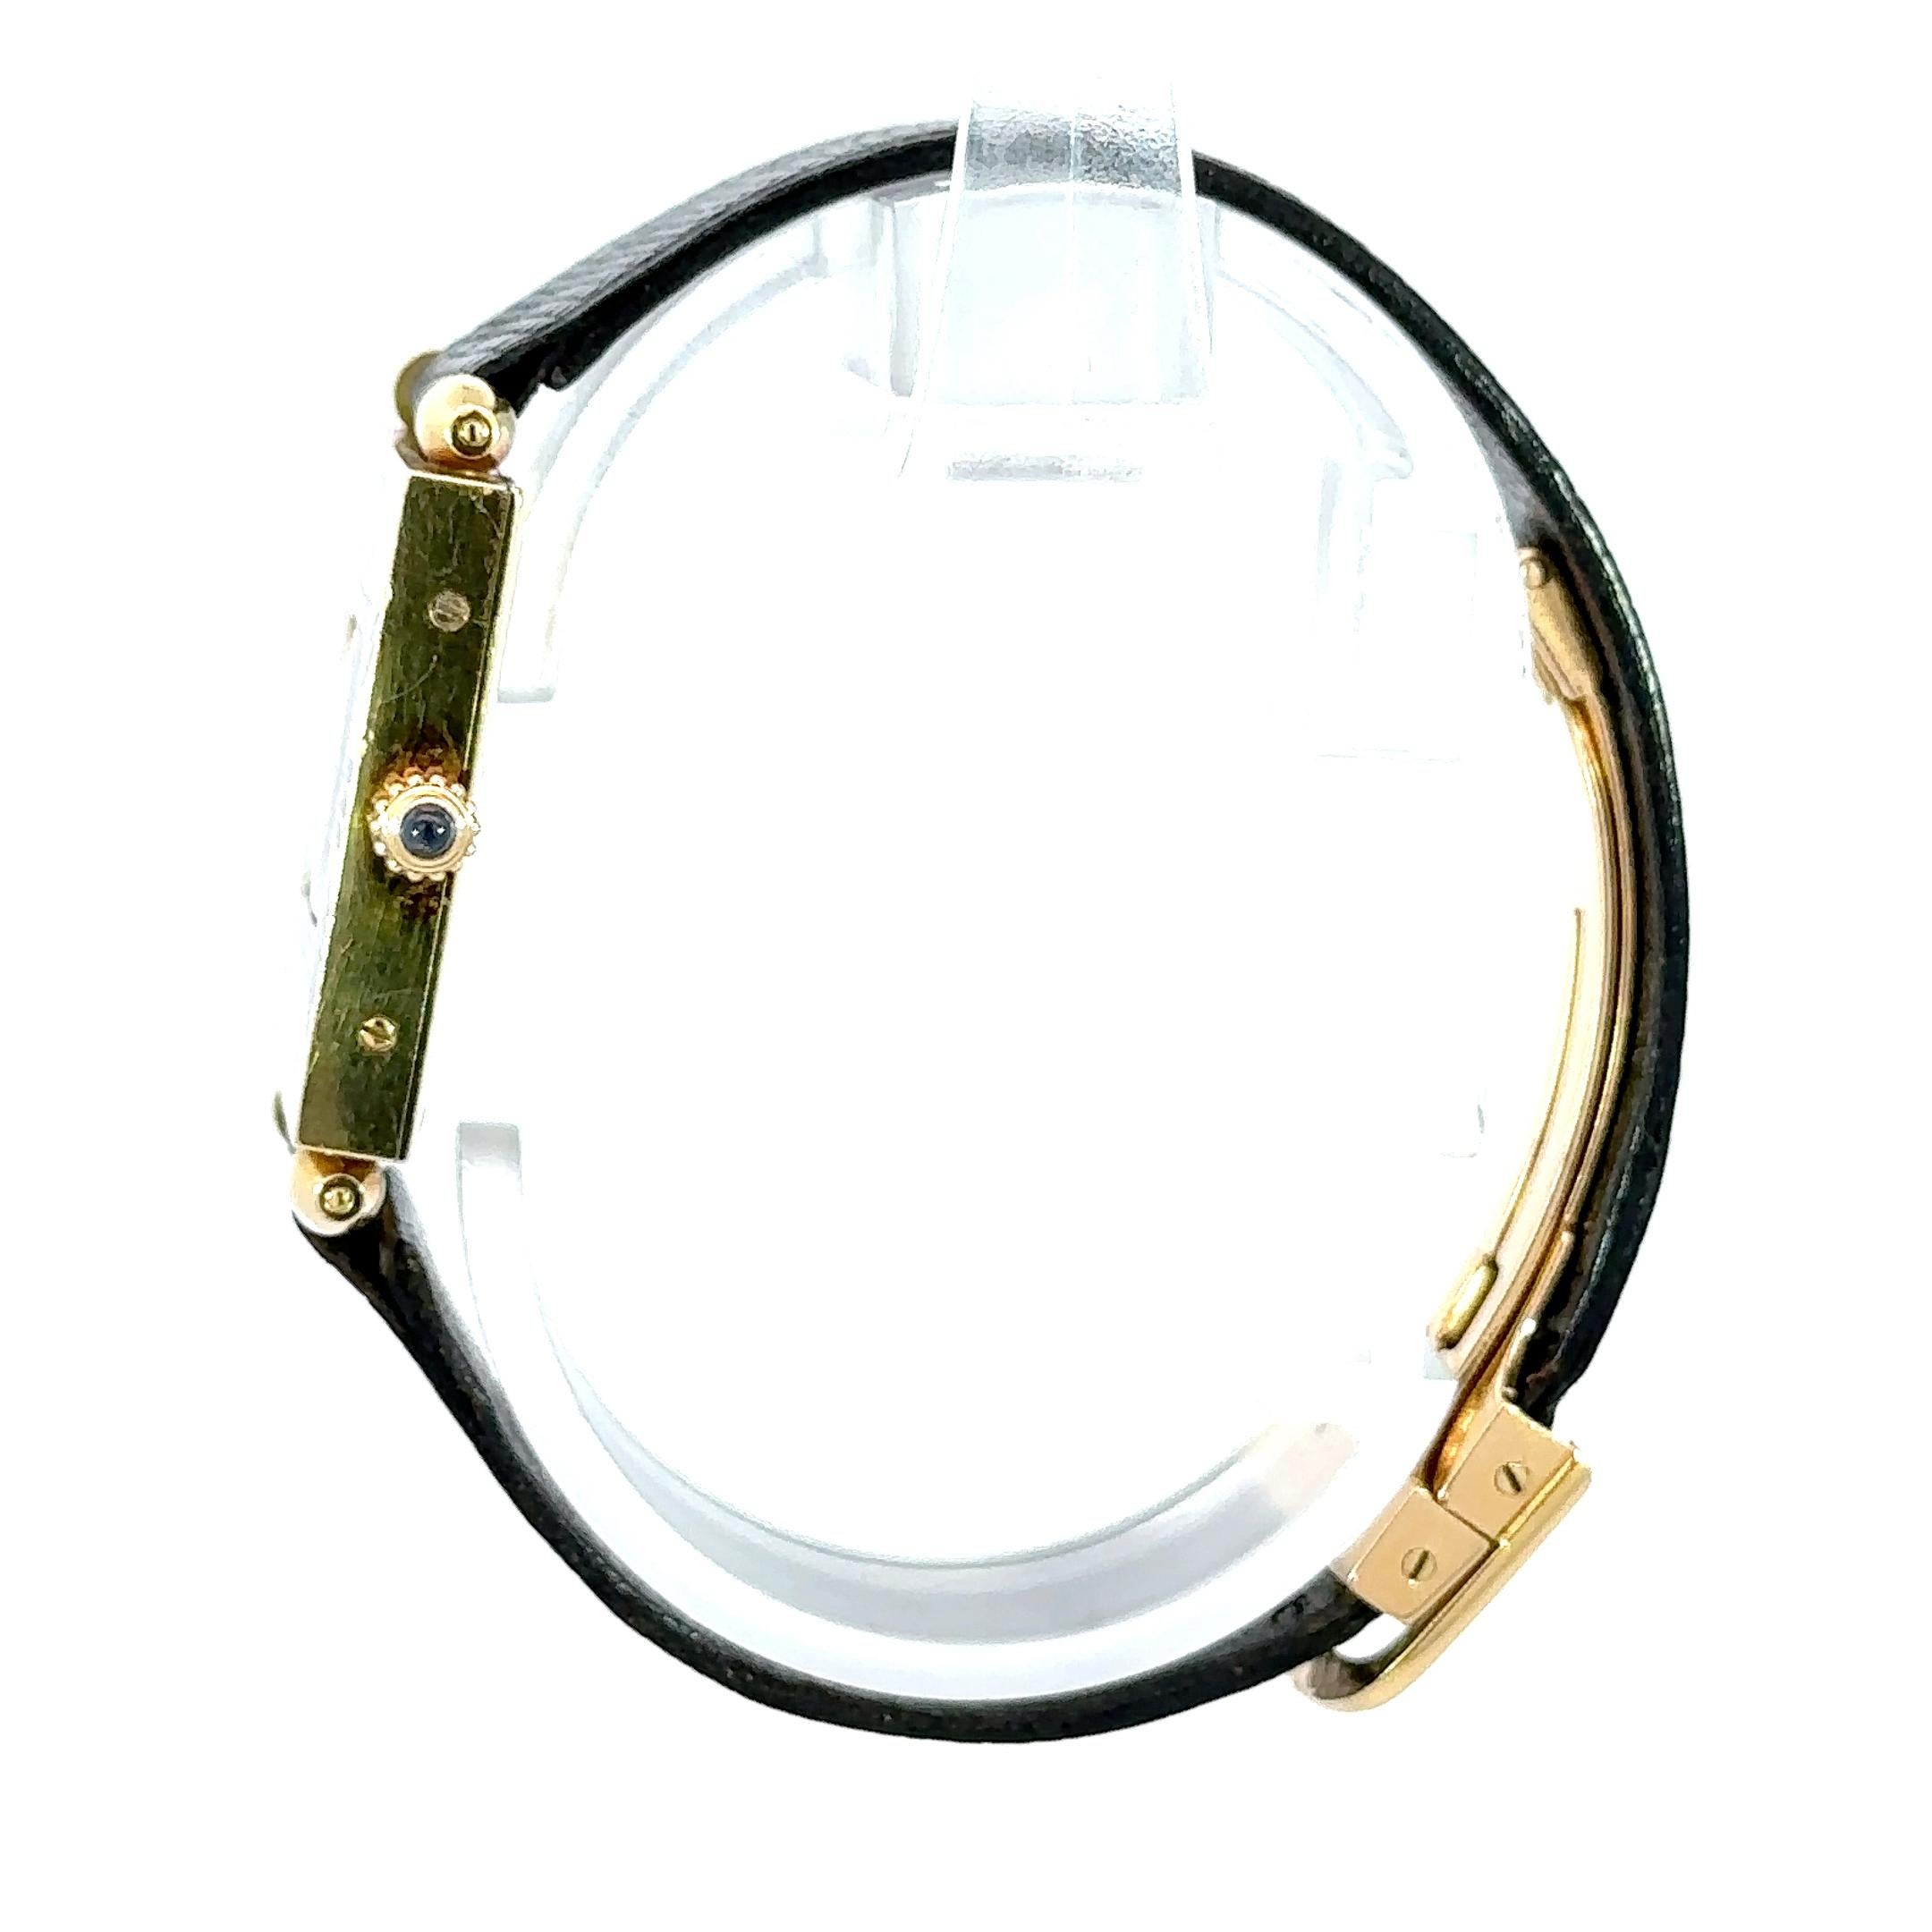 Cartier Square Quadrant with Enamel Numerals 18K Yellow Gold 
Very rare design
18K Yellow Gold with Enamel Numerals
25 x 32 mm Case size
Quartz Movement
White Dial
Reptile Strap